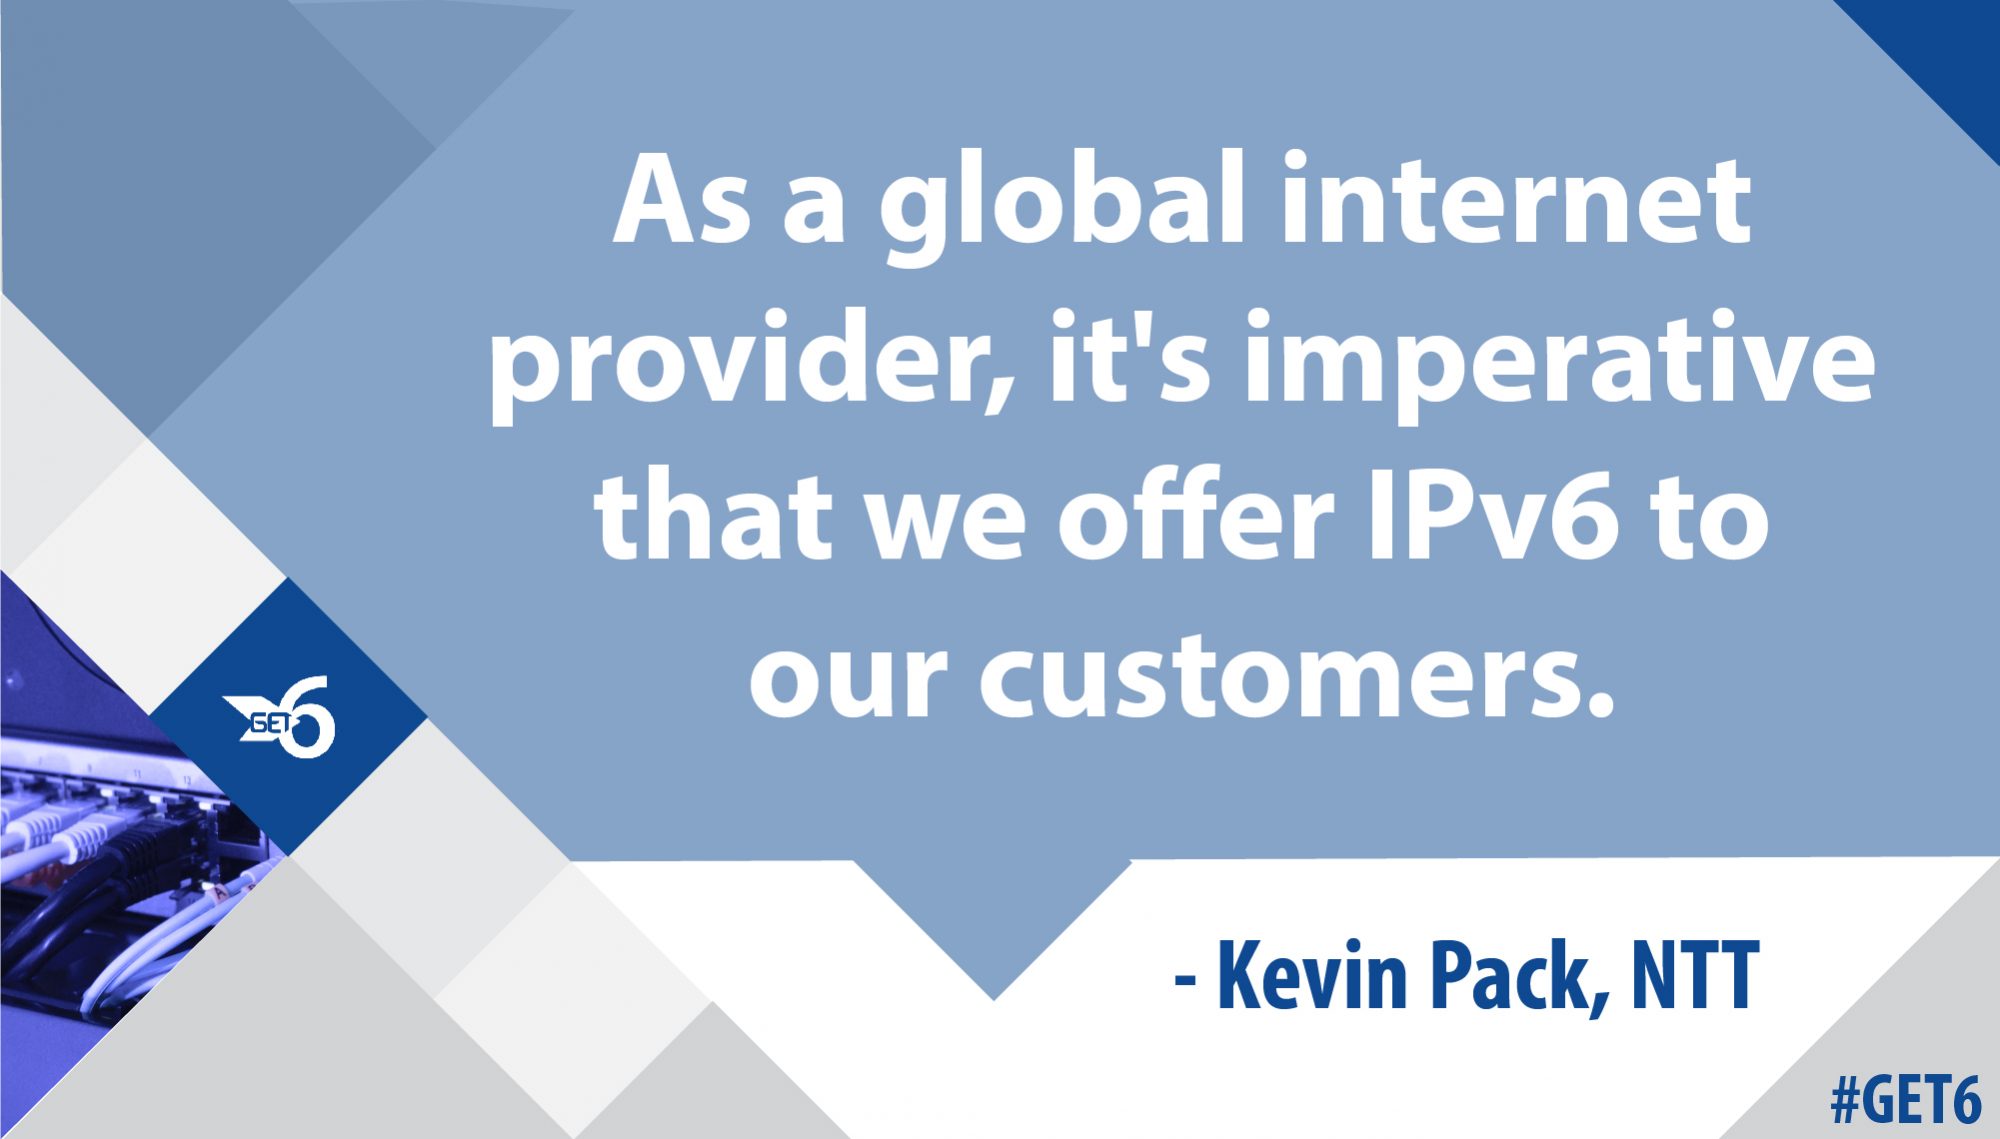 &ldquo;As a global internet provider, it&rsquo;s imperative that we offer IPv6 to our customers.&rdquo;